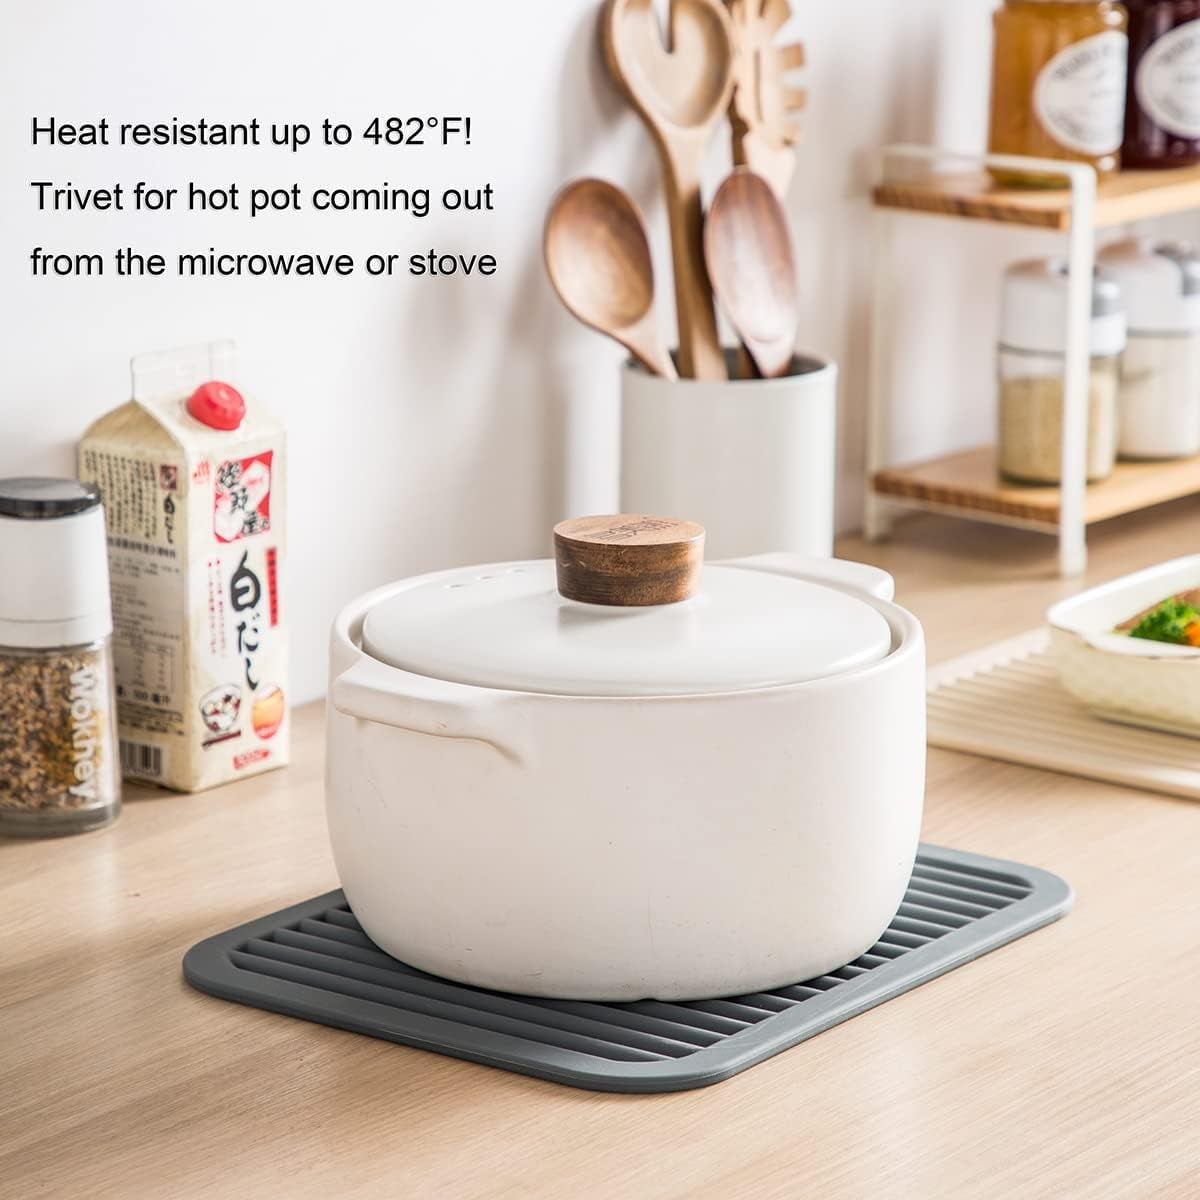 2 Pcs Large Silicone Trivet Mat For Hot Dishes/heat Resistant Pot Holder,  Non Slip Thick Flexible Hot Pads For Kitchen Table